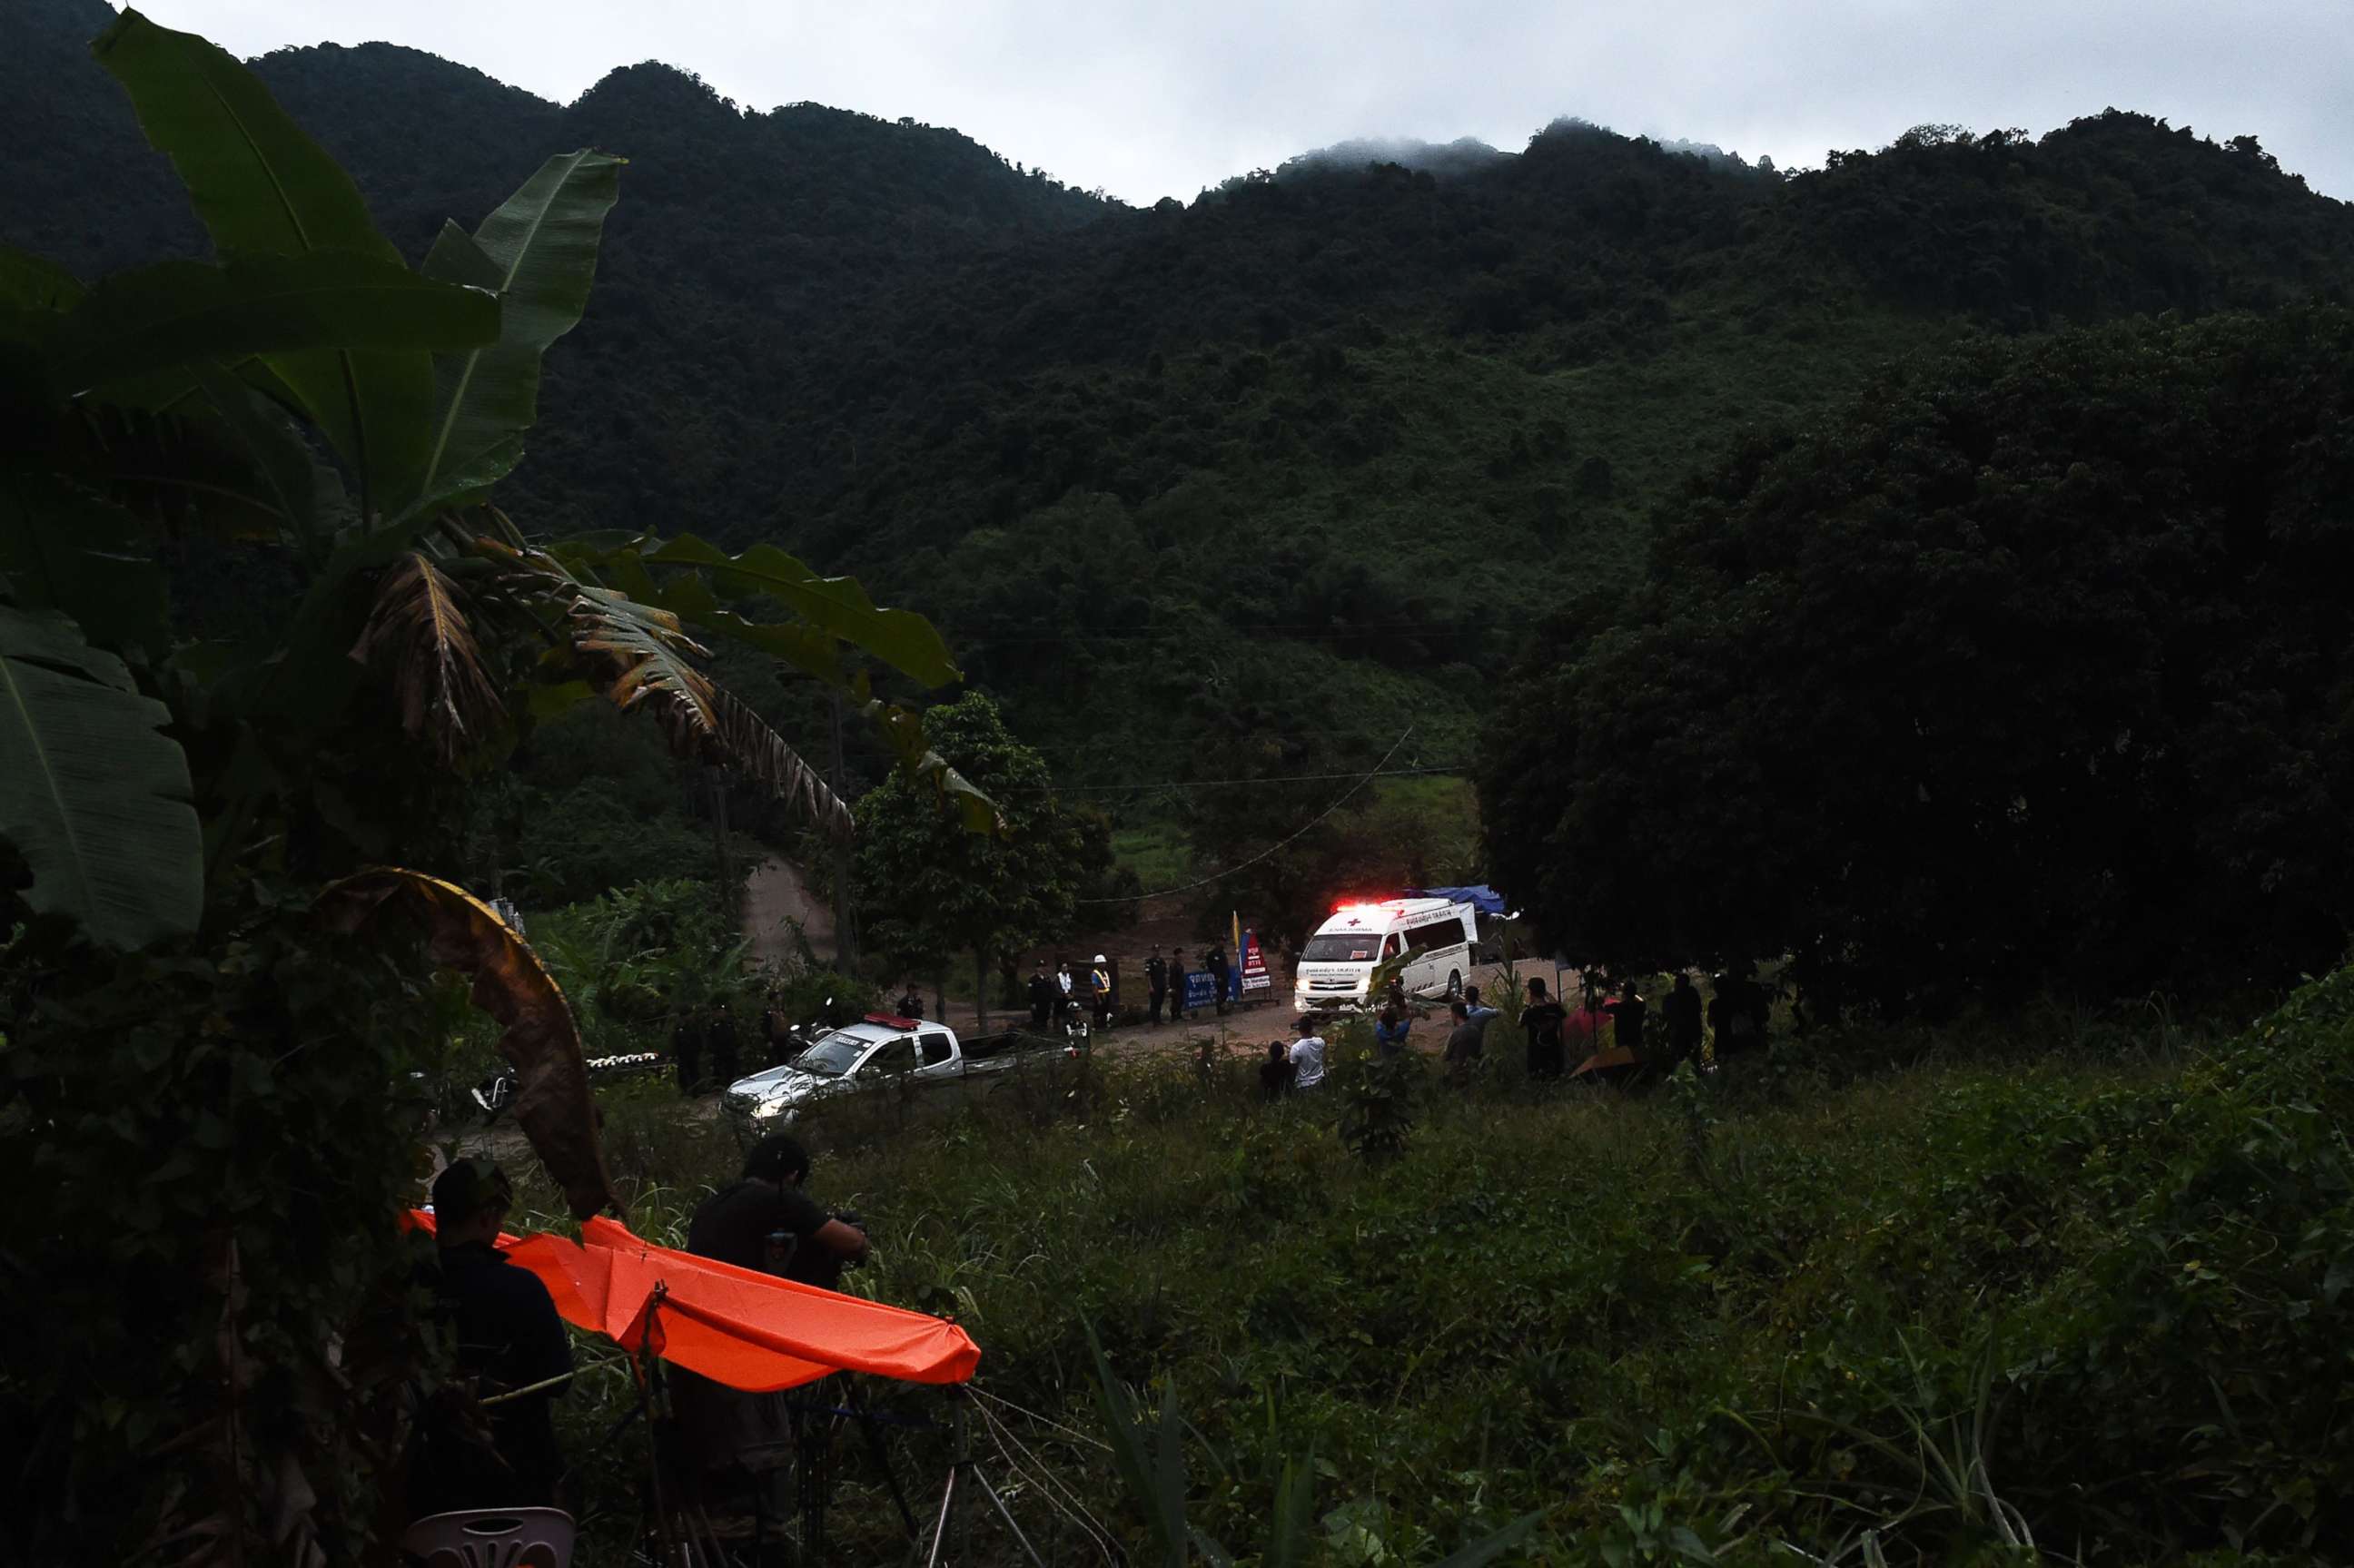 PHOTO: An ambulance leaves the Tham Luang cave area after divers started evacuating the 12 boys and their football team coach trapped in a flooded cave in Khun Nam Nang Non Forest Park in the Mae Sai district of Chiang Rai province on July 8, 2018.